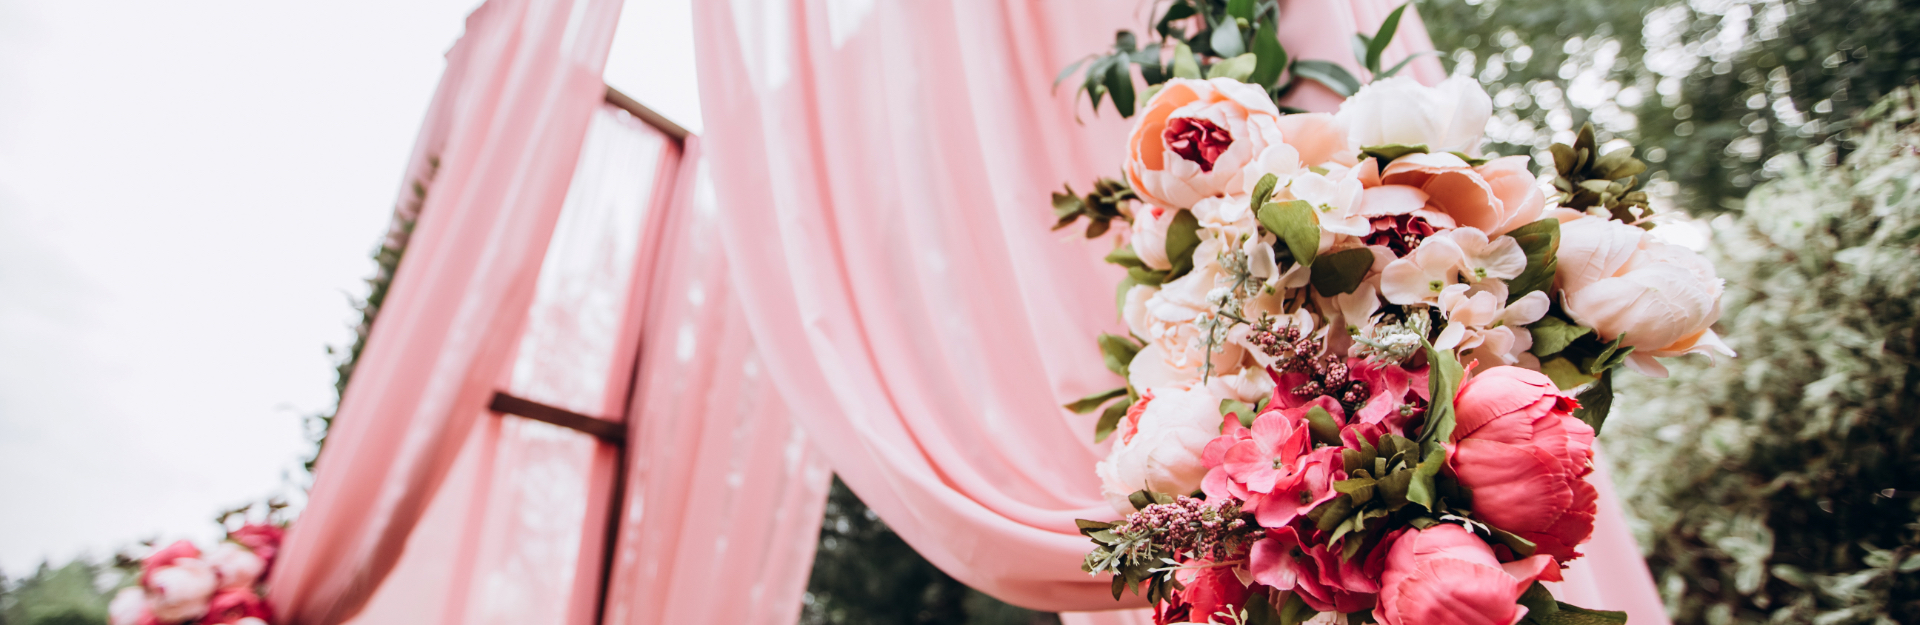 Wedding ceremony arch with pink fabric and rose bouquet